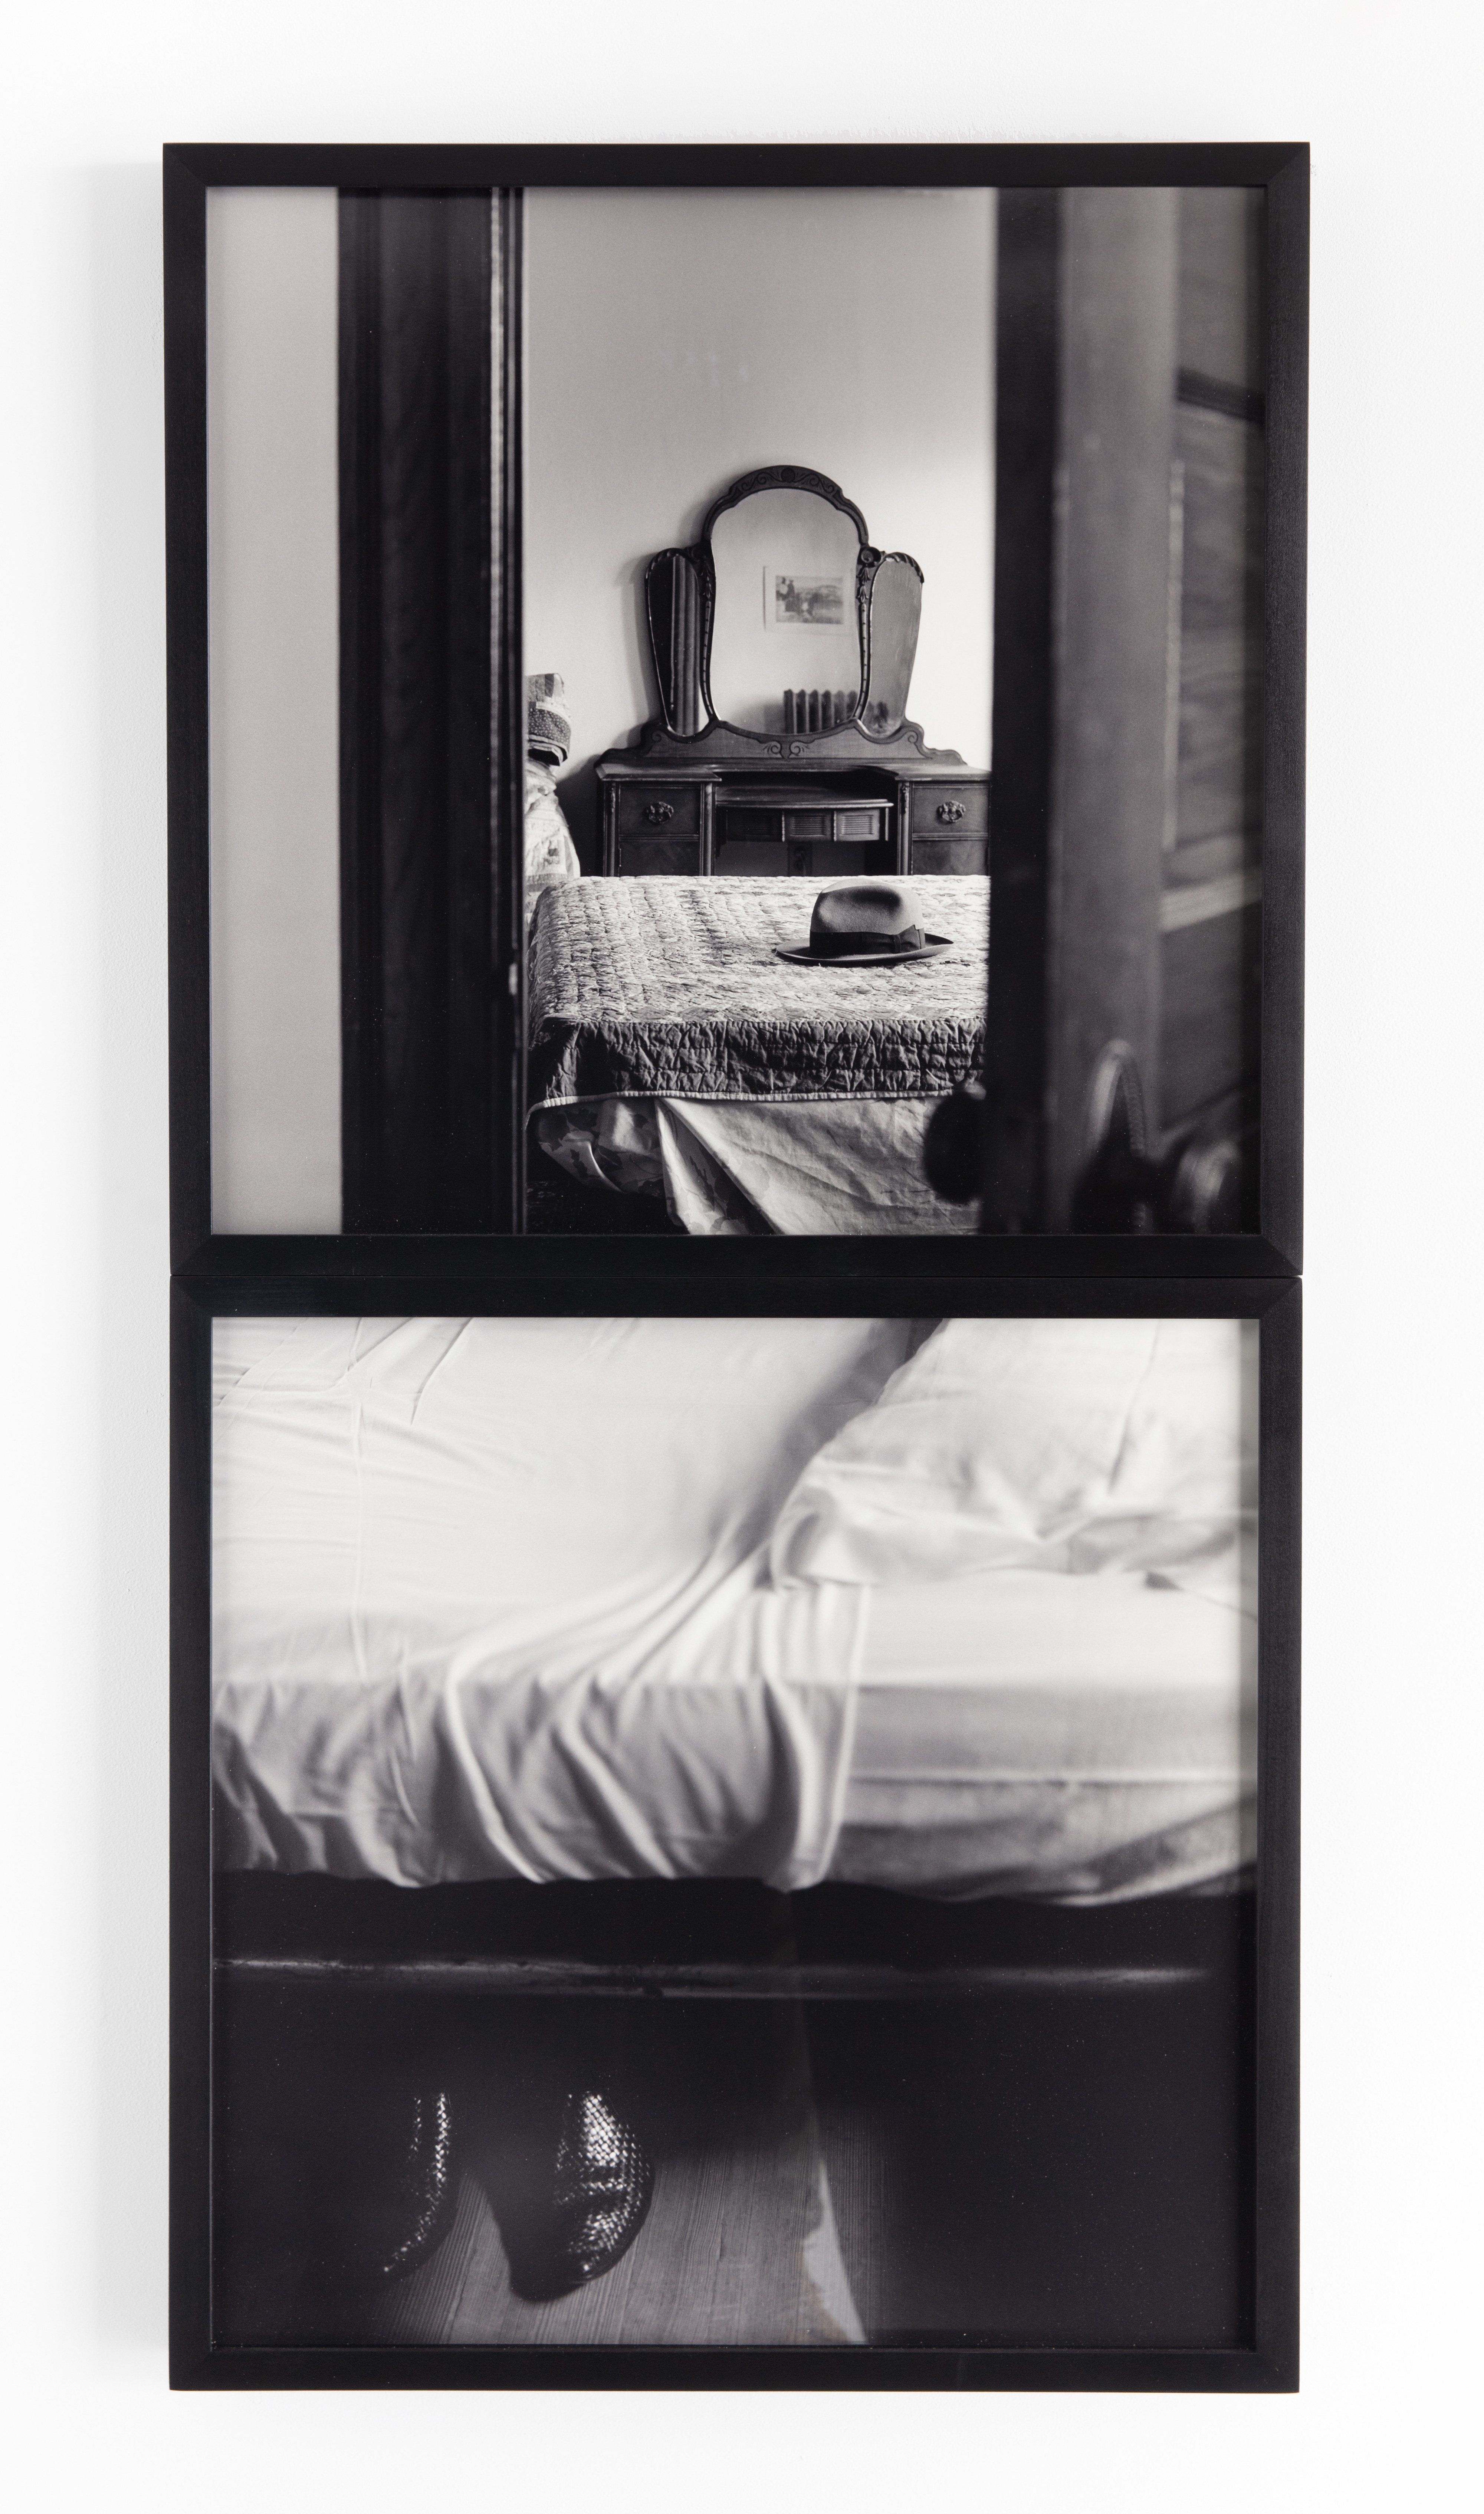 Galerie Barbara Thumm \ Carrie Mae Weems_Untitled (Hat on Bed/ Shoes under Bed)_1992_CMW-92-004 \ Untitled (Hat on Bed/ Shoes under Bed) (1992)